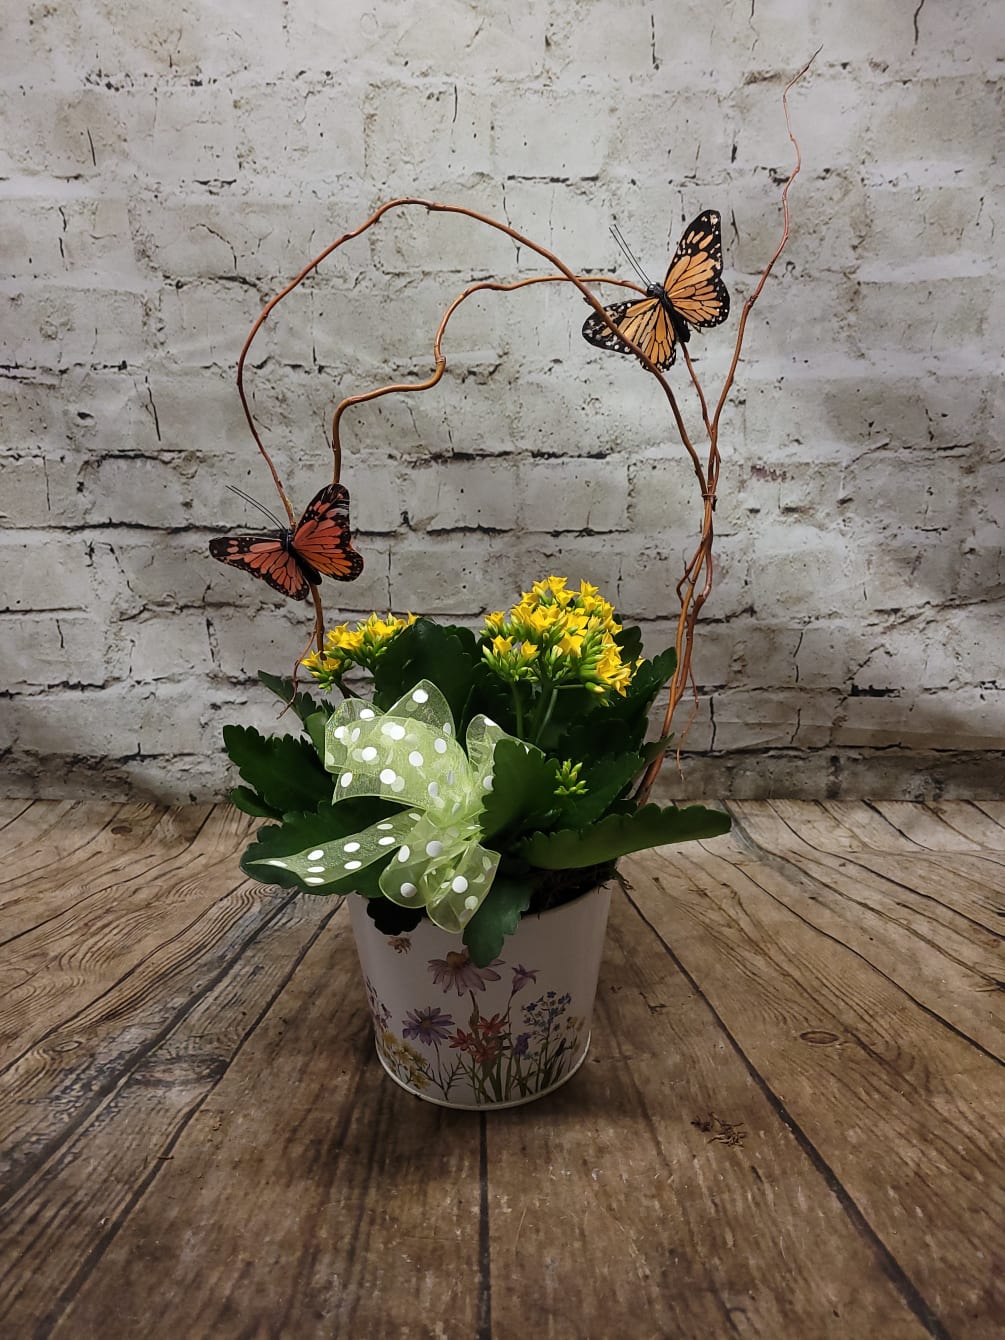 Decorated with butterflies and presented in a cheerful spring planter, kalanchoe is